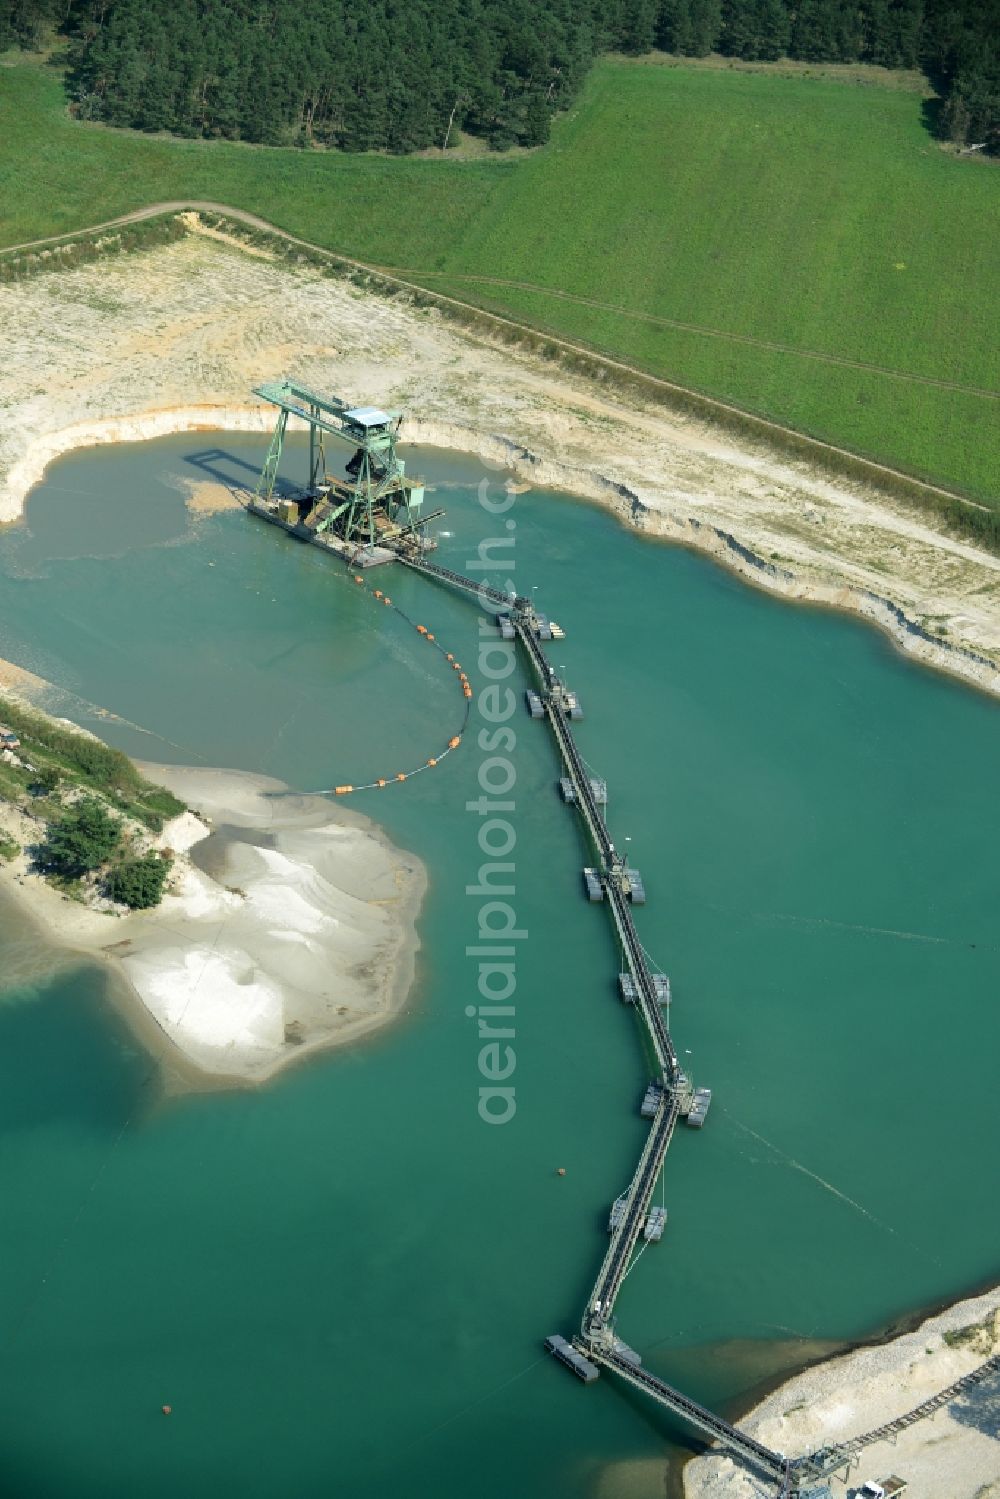 Aerial photograph Laußig - Gravel surface mining the gravel pit of Xella Deutschland GmbH in Laussig in Saxony